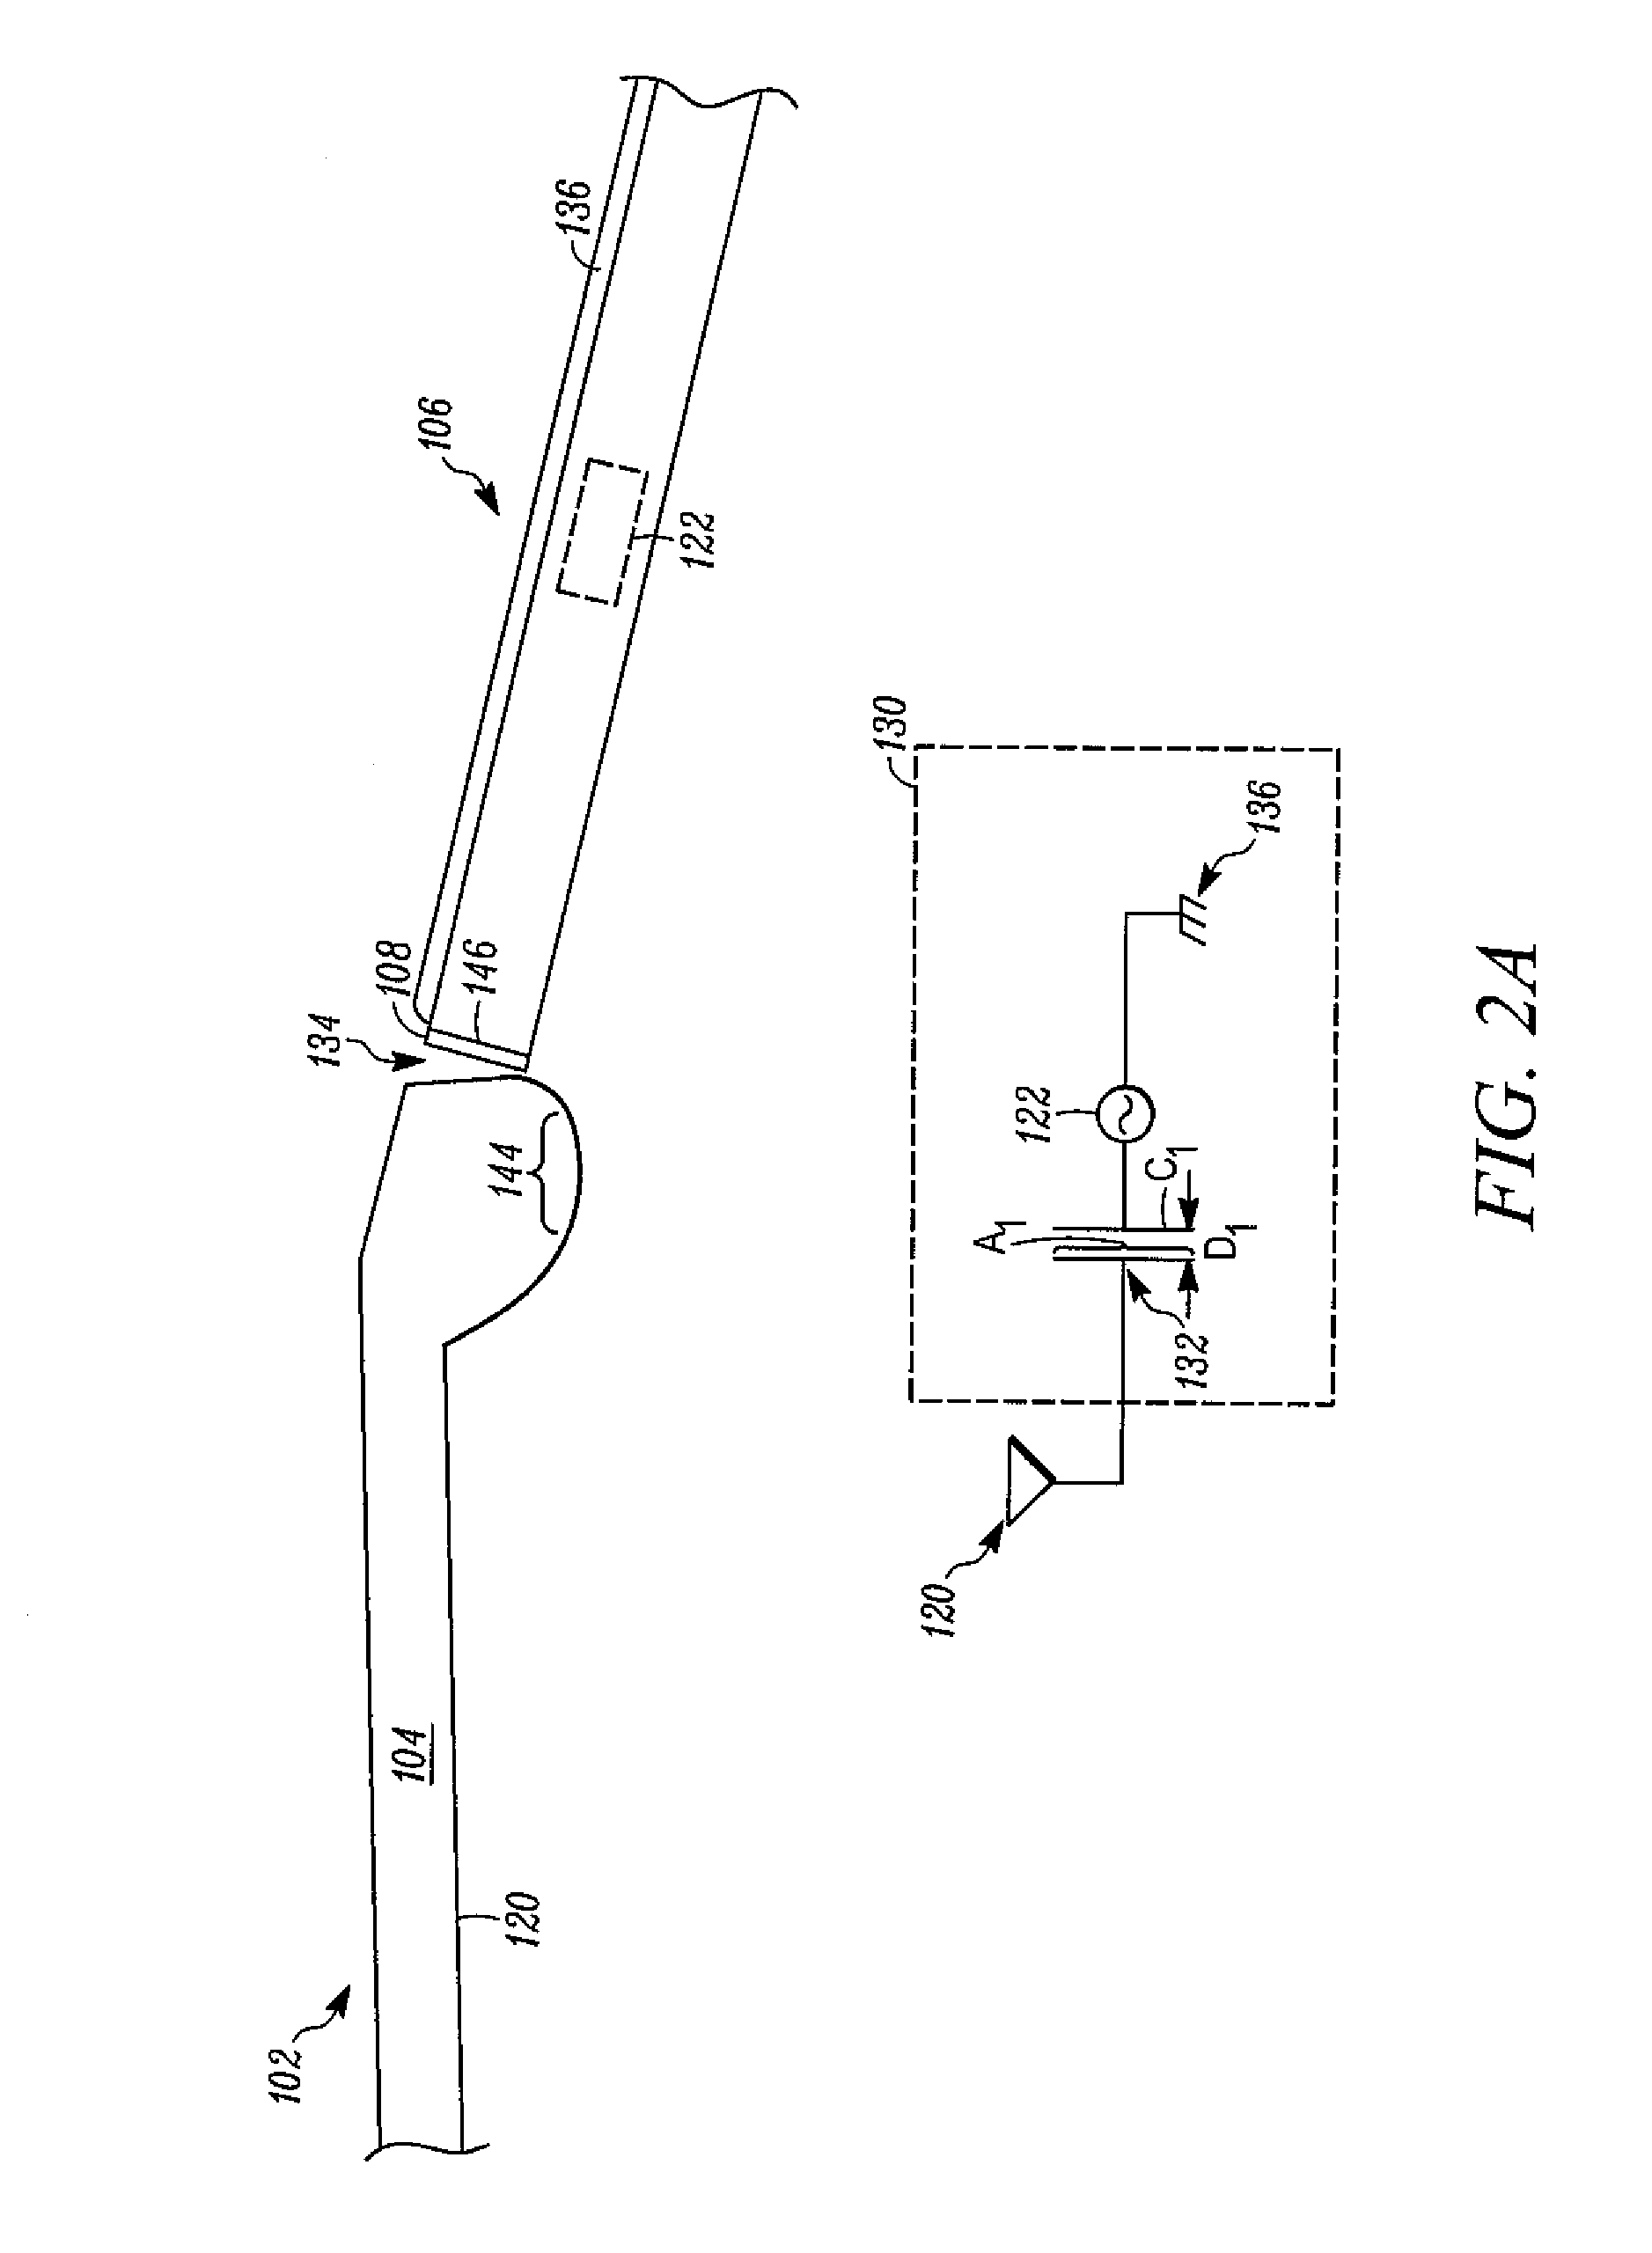 Antenna Arrangement for Hinged Wireless Communication Device